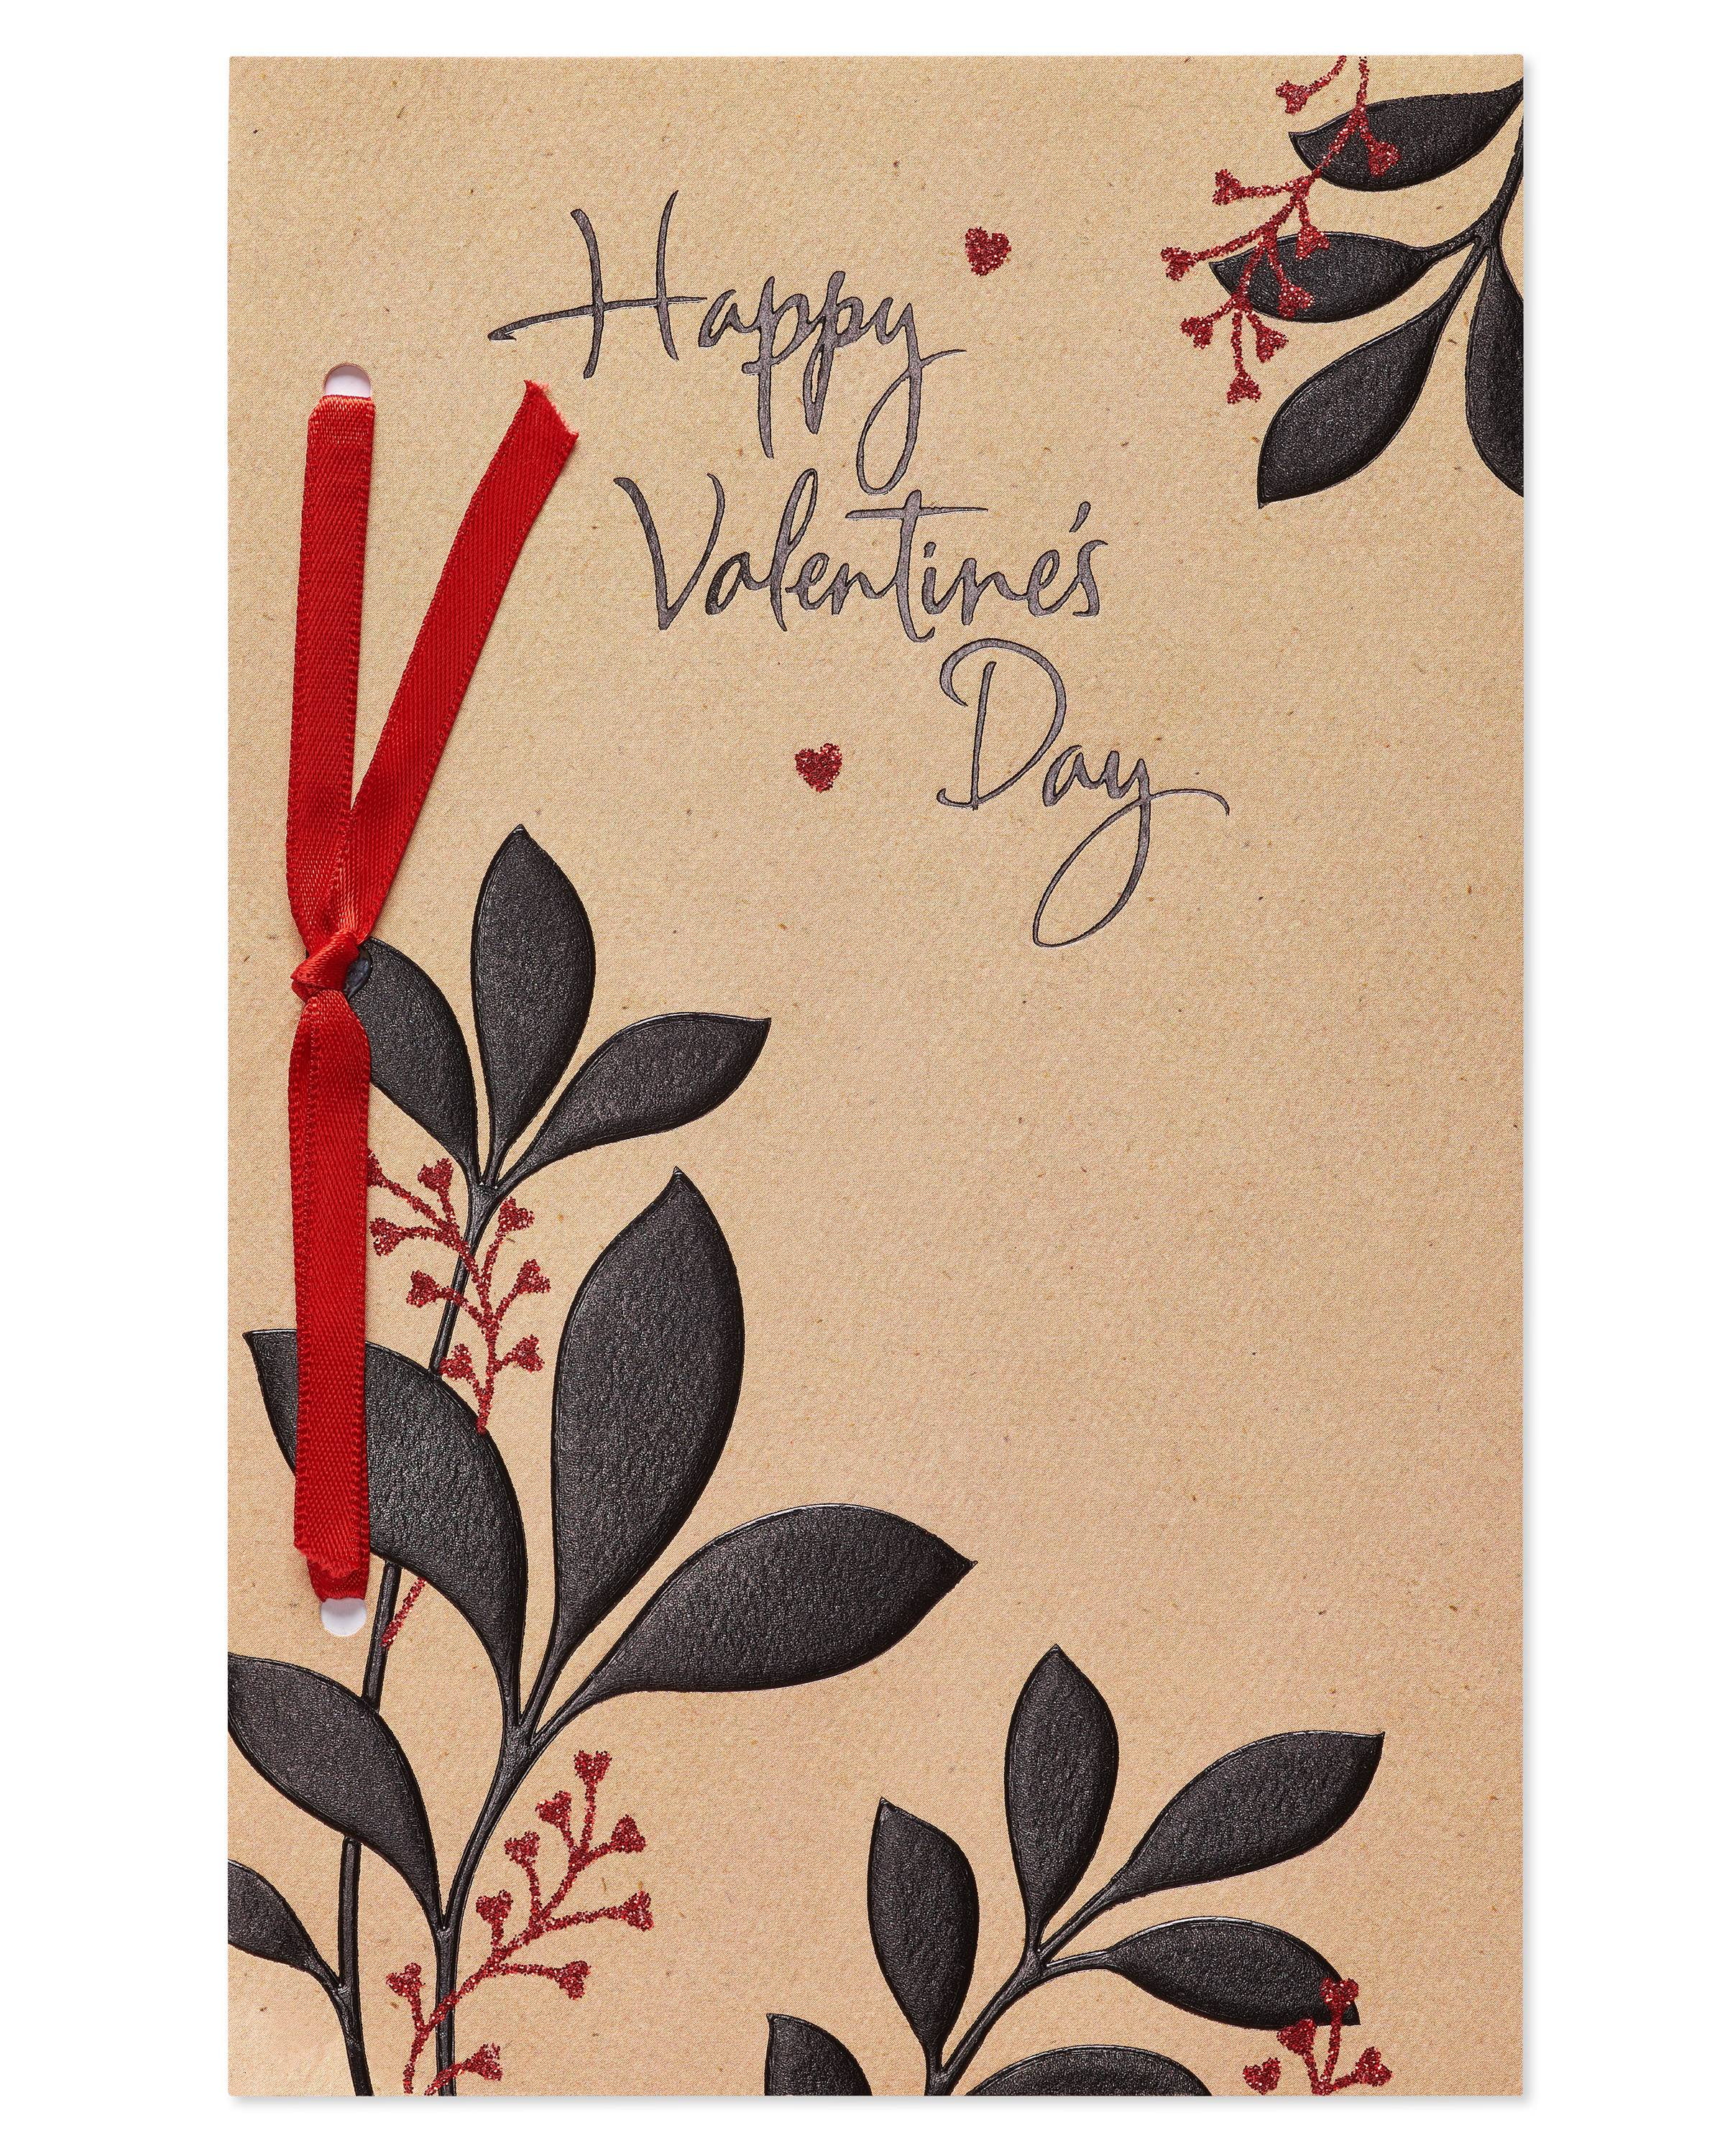 American Greetings Romantic Valentine's Day Card for Her (More Than